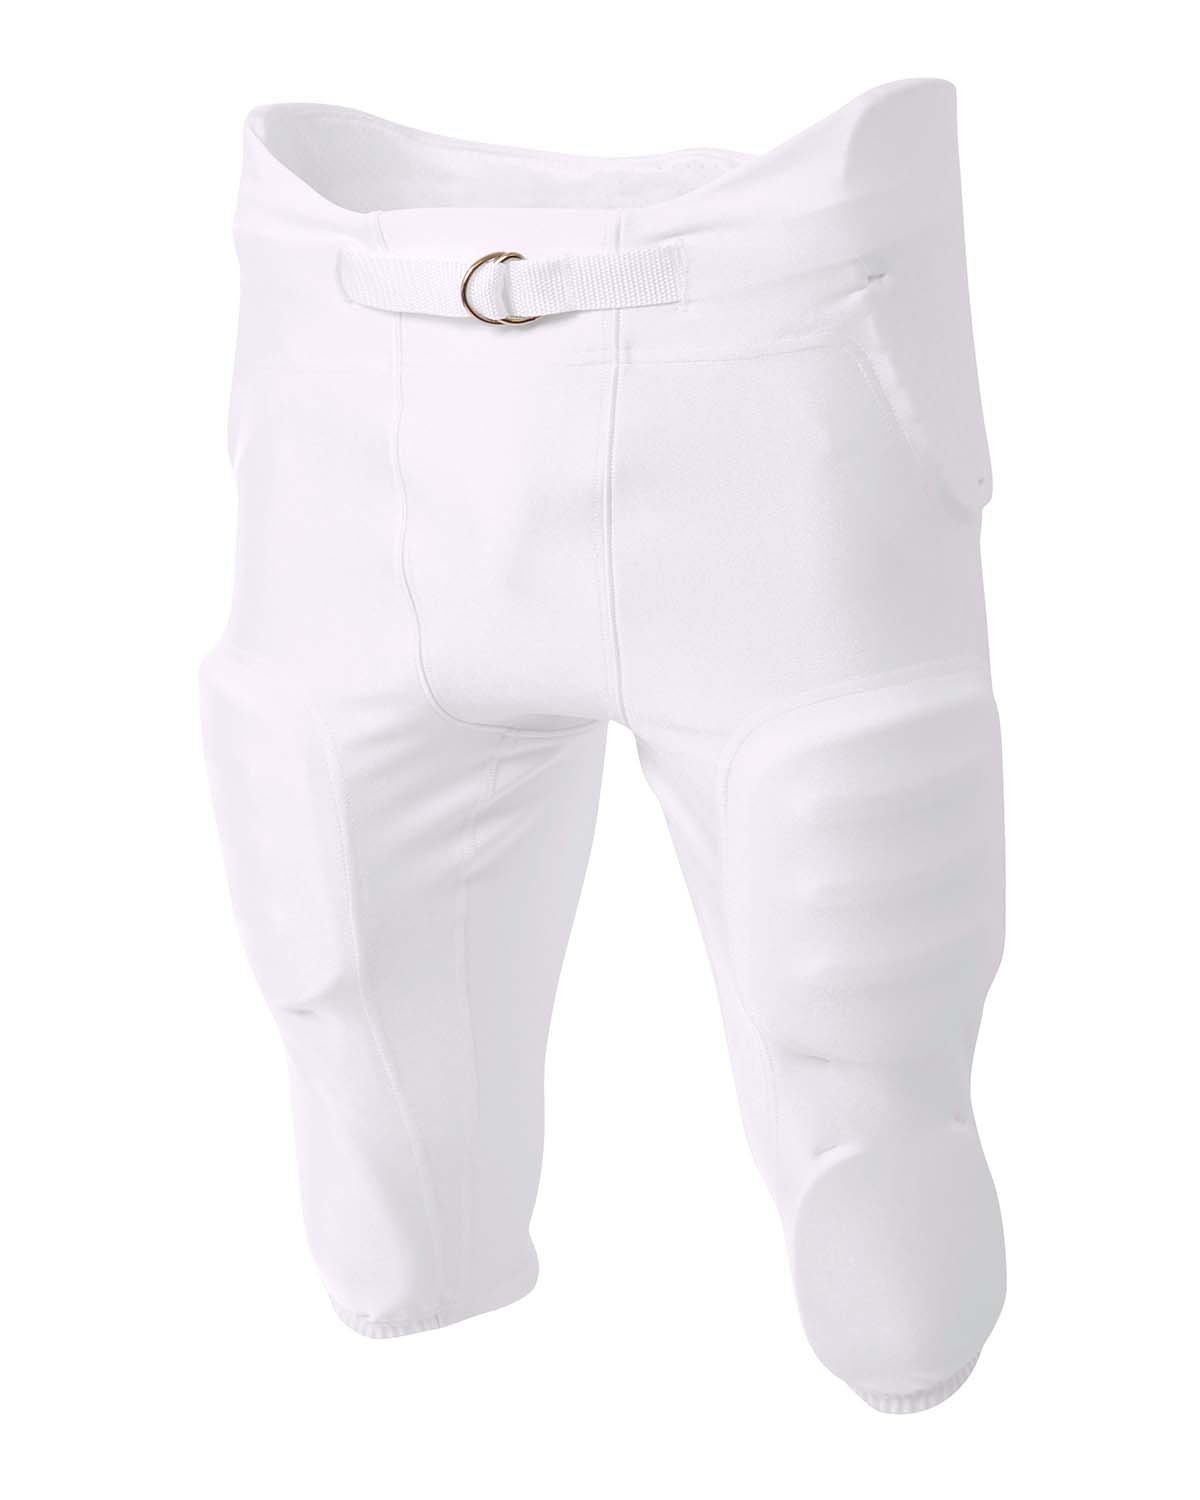 Mens Integrated Zone Football Pant-A4